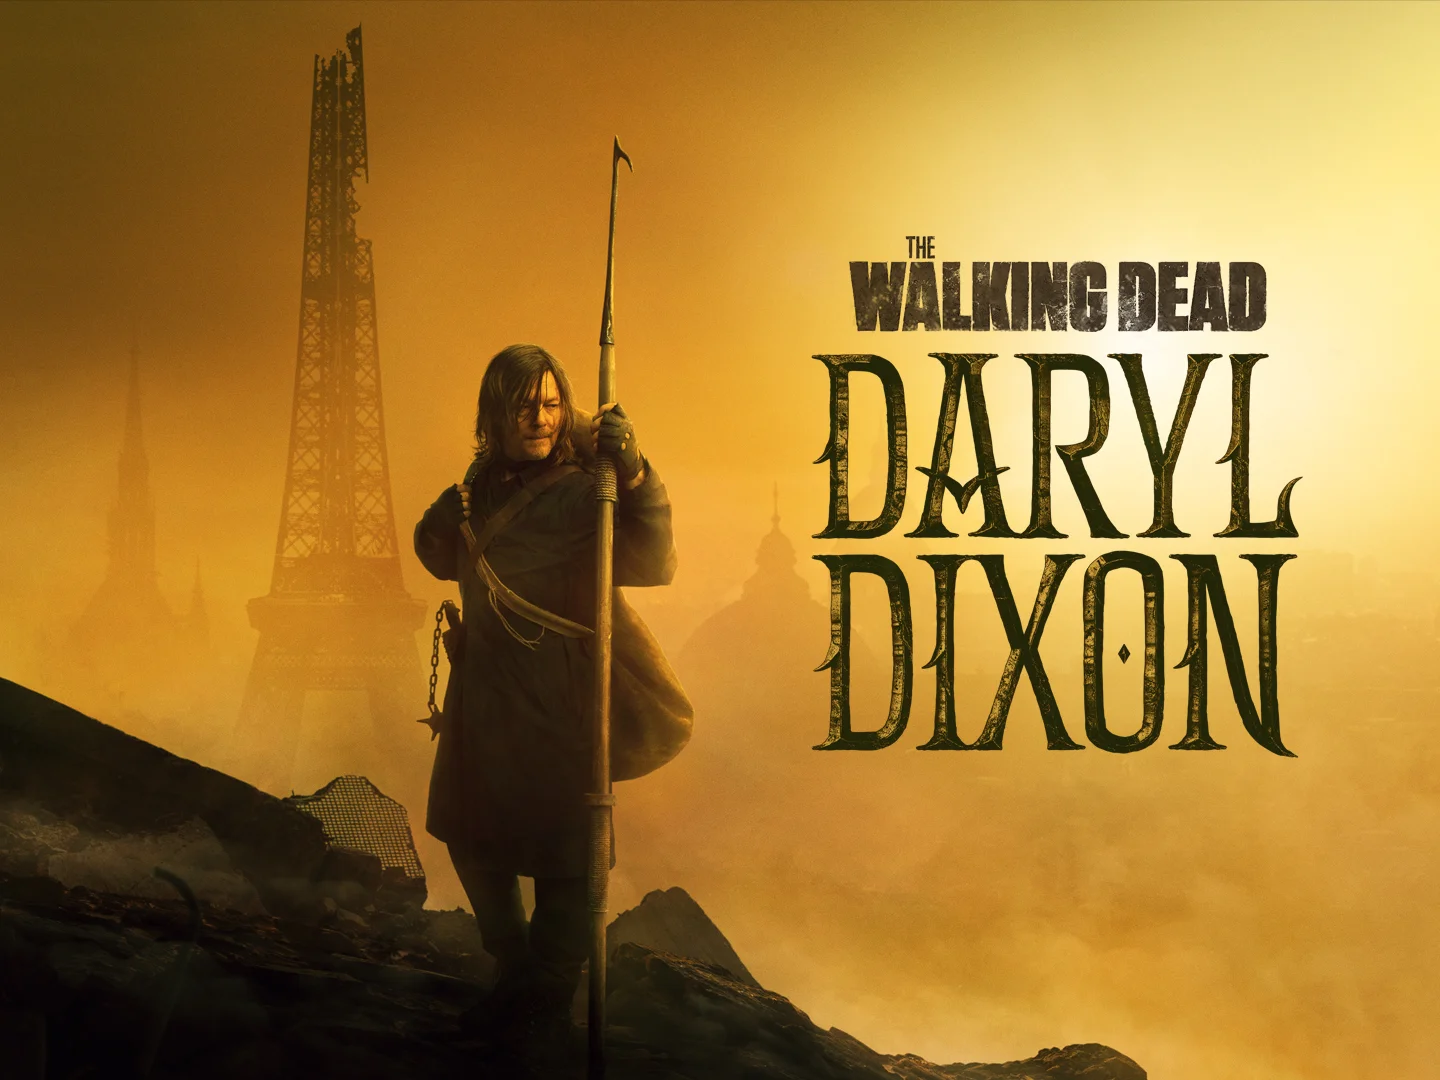 Where to Watch The Walking Dead: Daryl Dixon Online